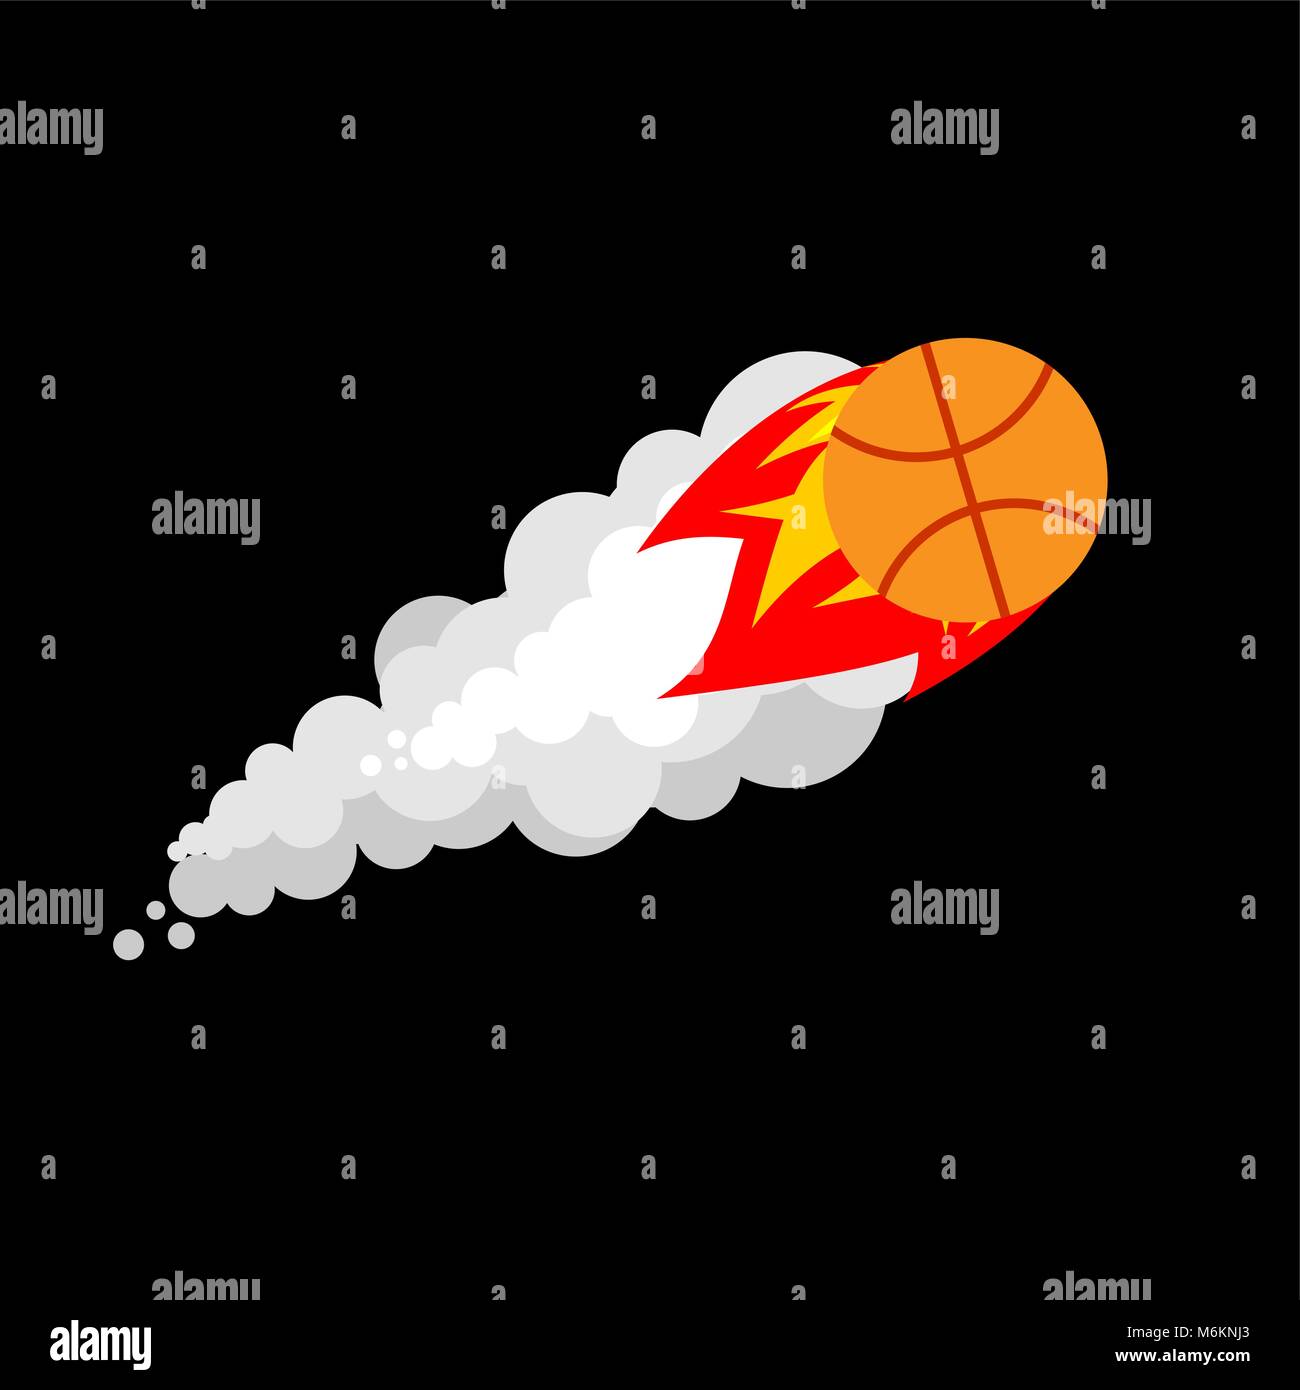 Fiery Basketball isolated. Flying gaming ball vector illustration Stock Vector